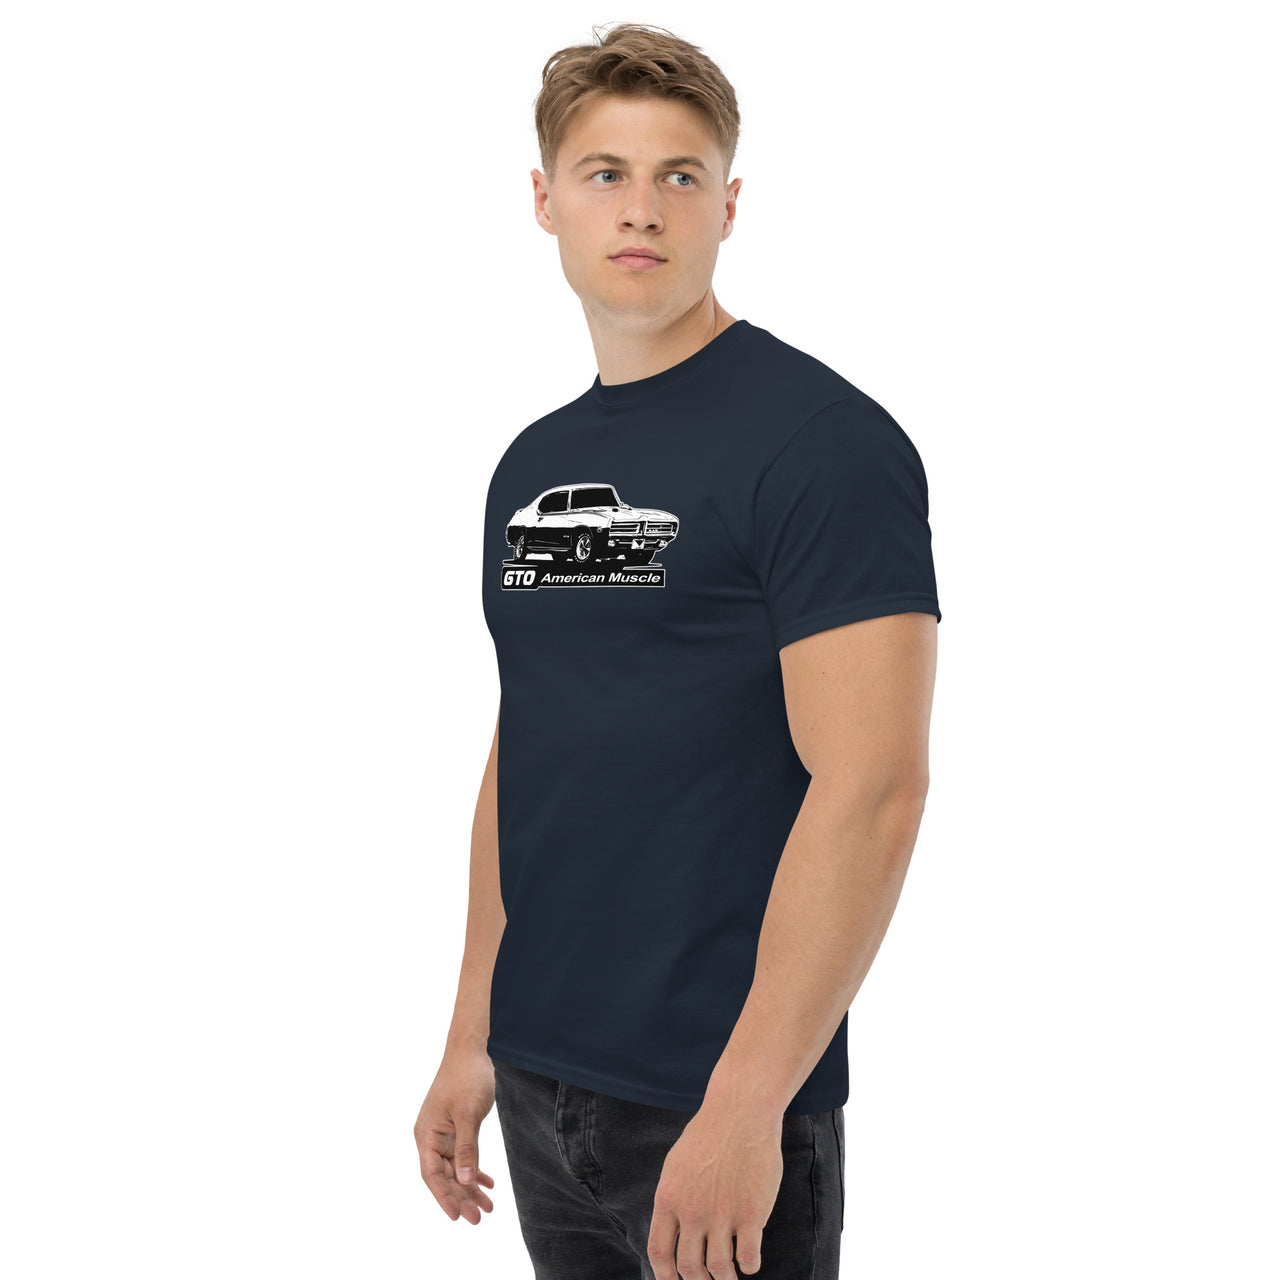 1969 GTO T-Shirt modeled in navy